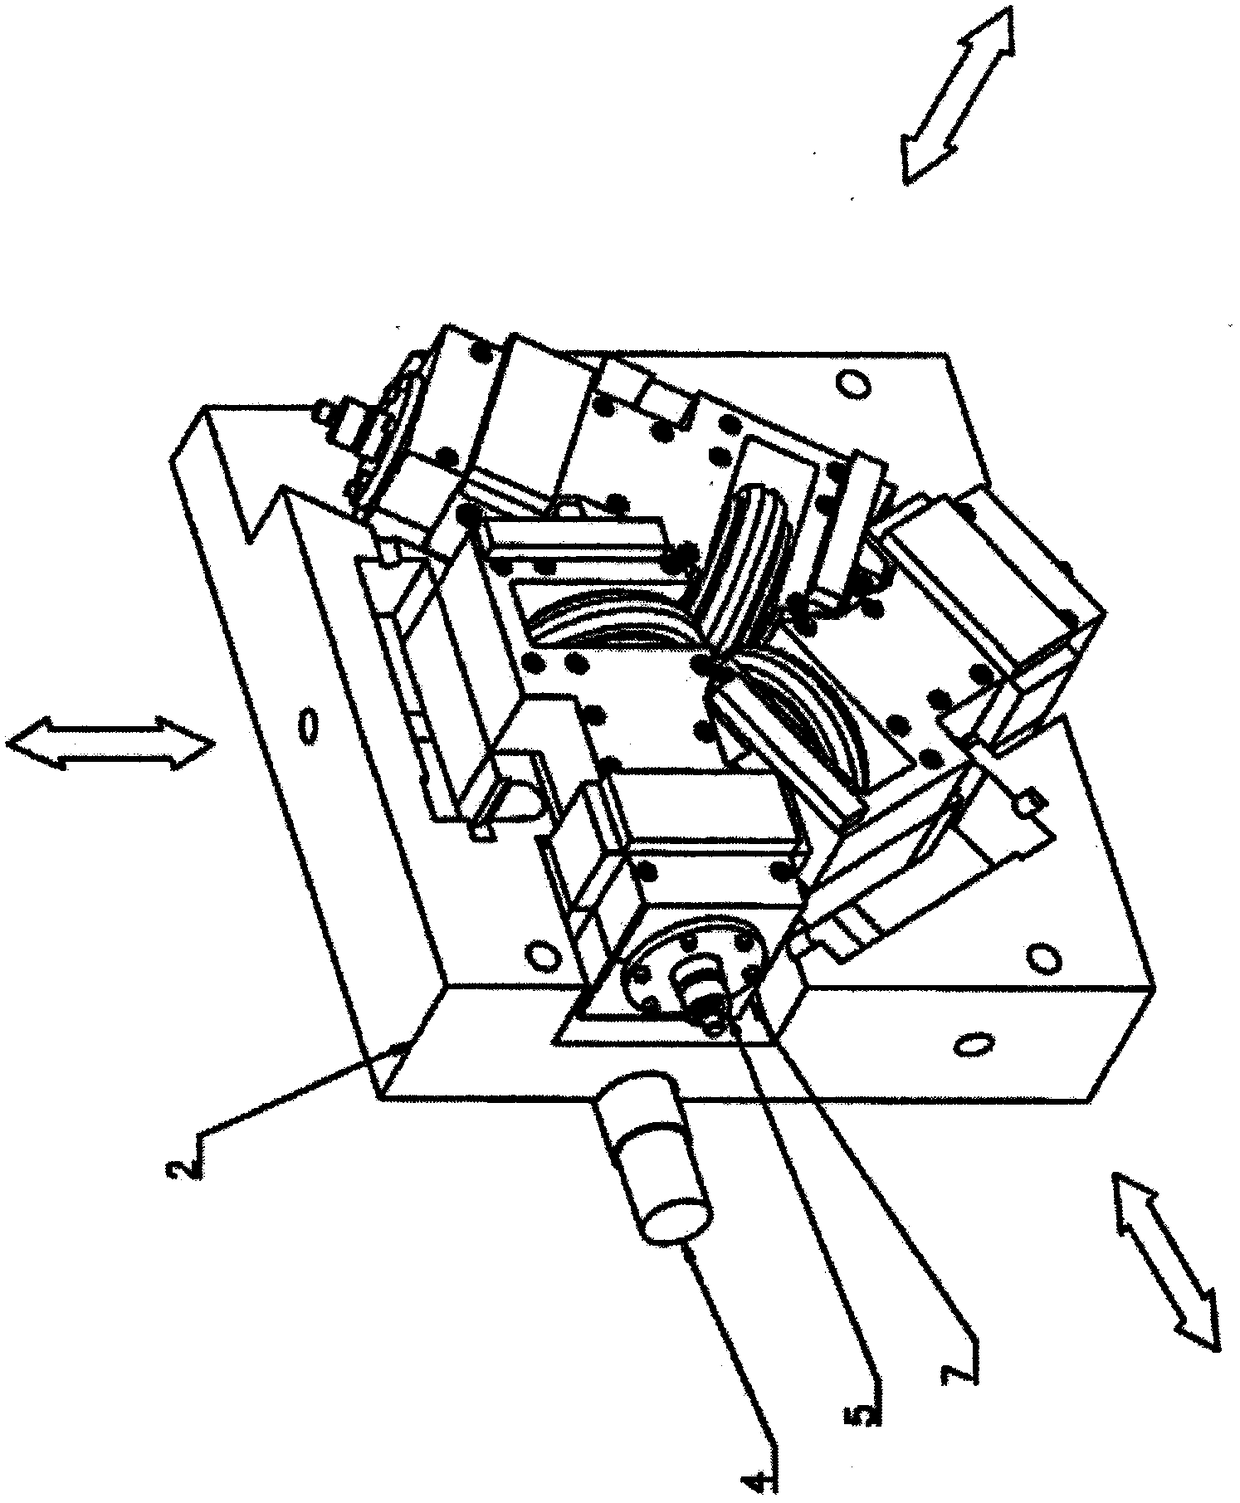 A two-stage lateral transmission three-roll rolling mill